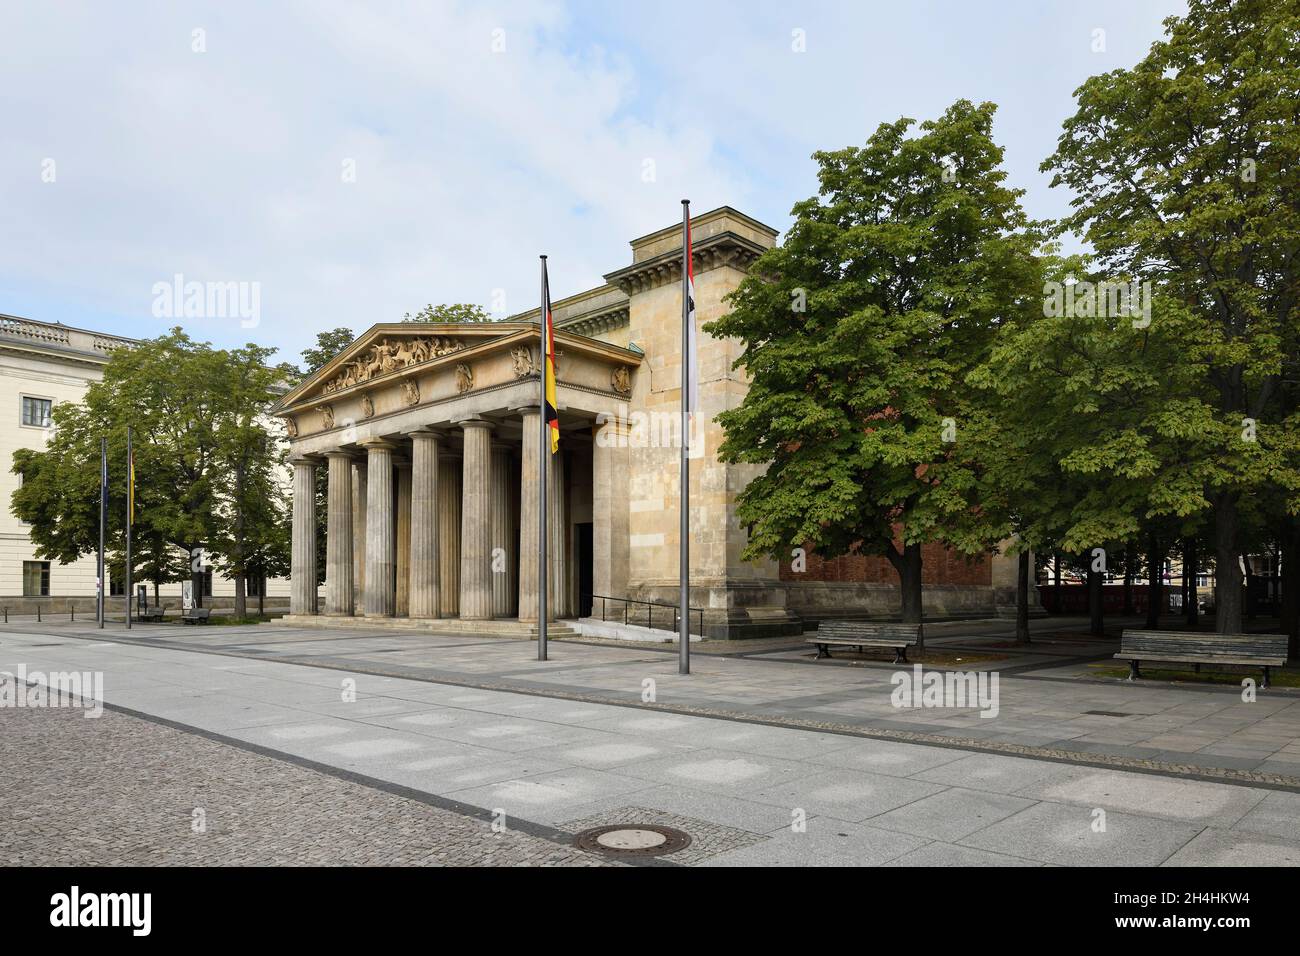 Central Memorial to the Victims of War and Tyranny (Neue Wache), Unter den Linden, Berlin, Germany Stock Photo